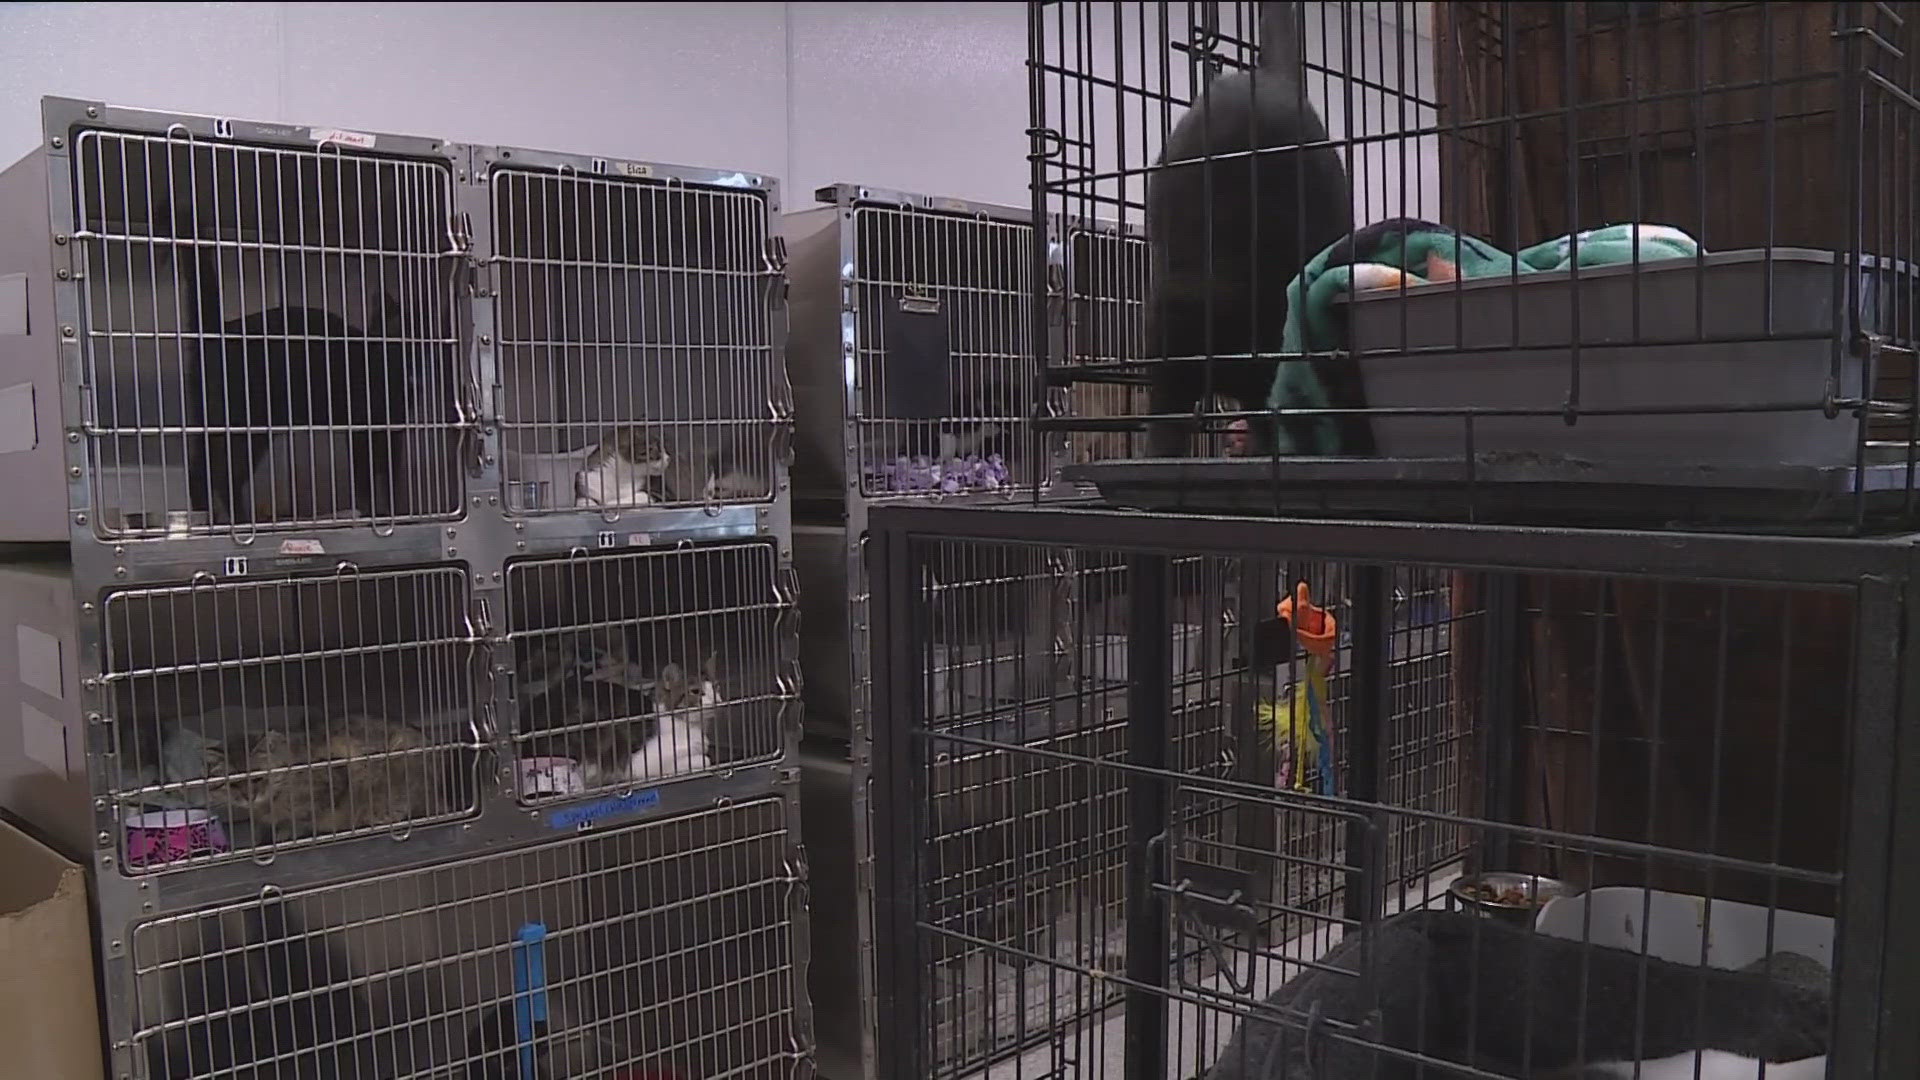 Officials say 42 animals were removed from the facility and placed with the Humane Society.